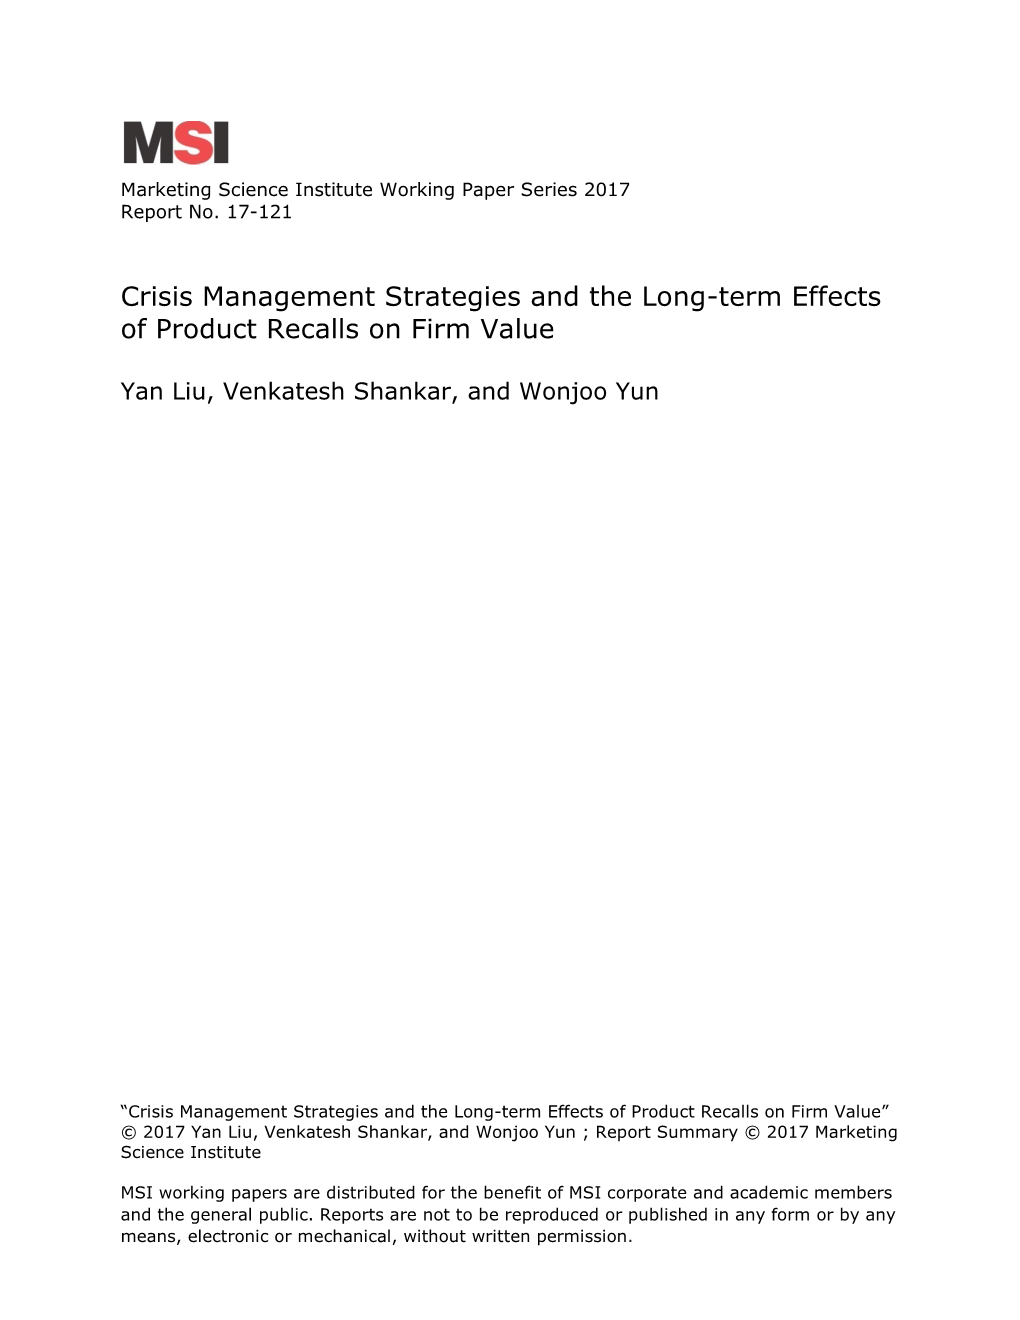 Crisis Management Strategies and the Long-Term Effects of Product Recalls on Firm Value